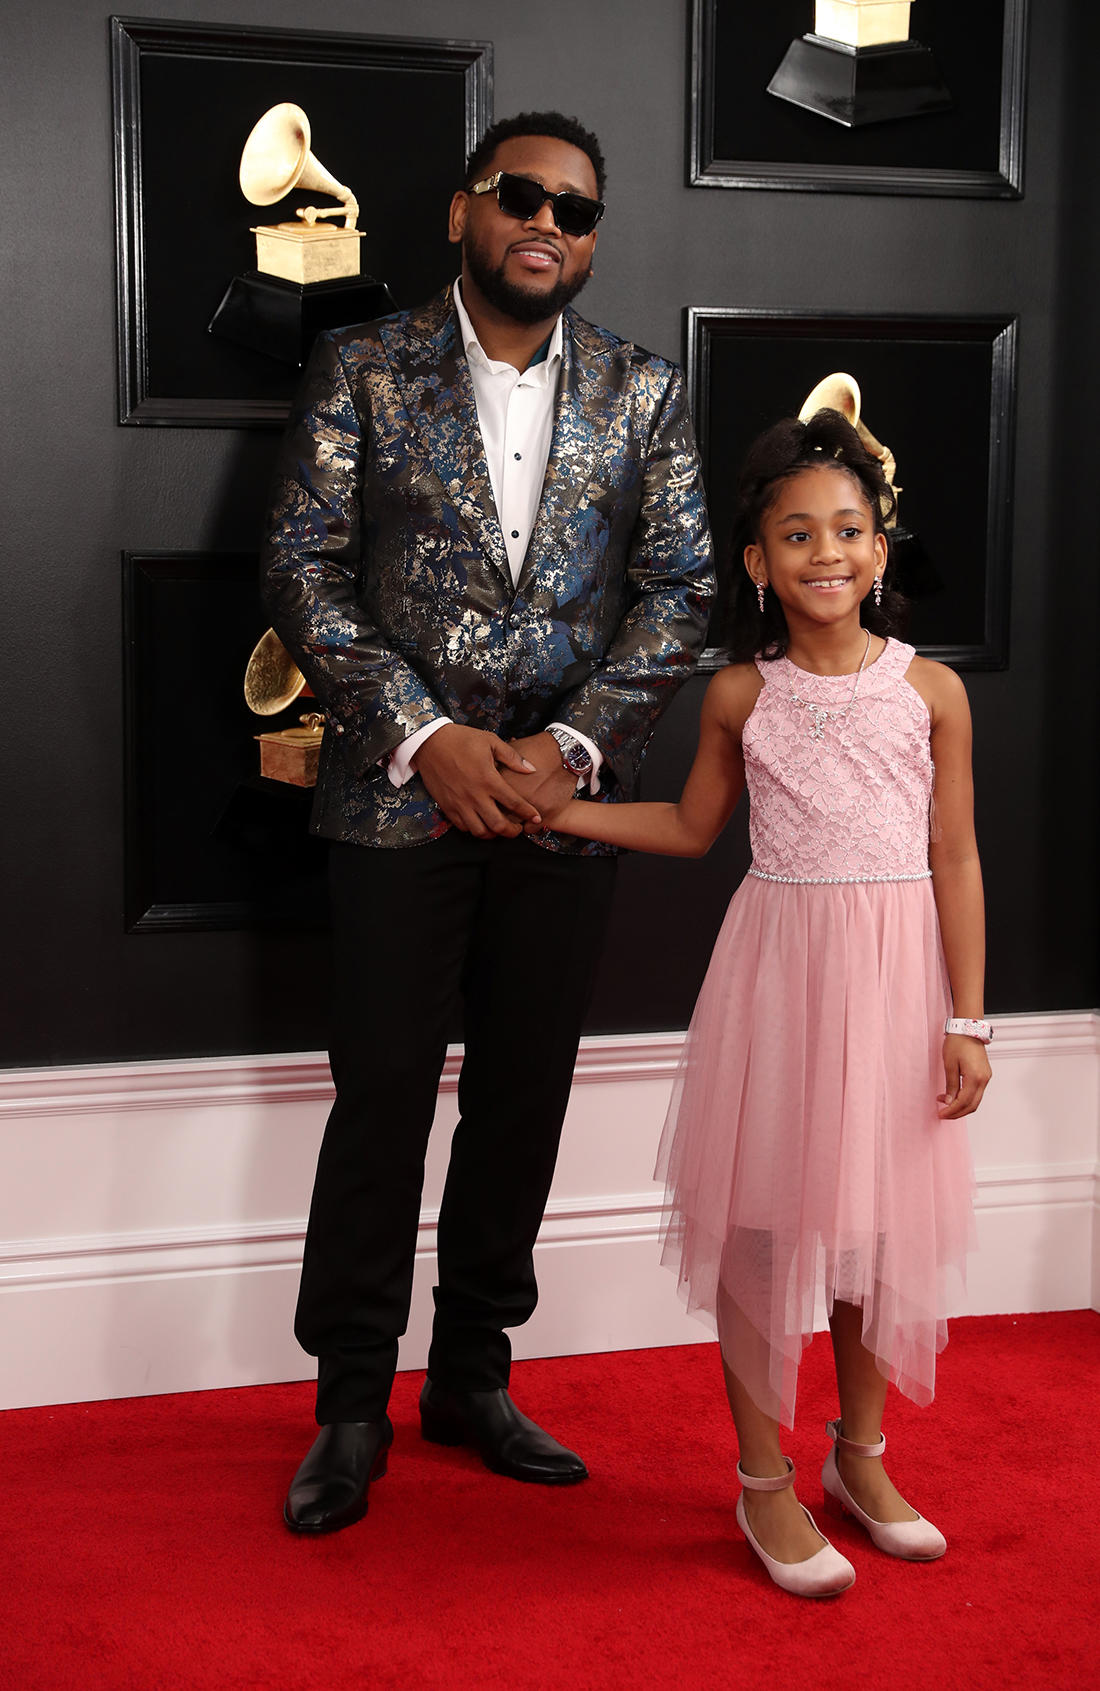 Red Carpet pictures from the Grammy Awards 2019